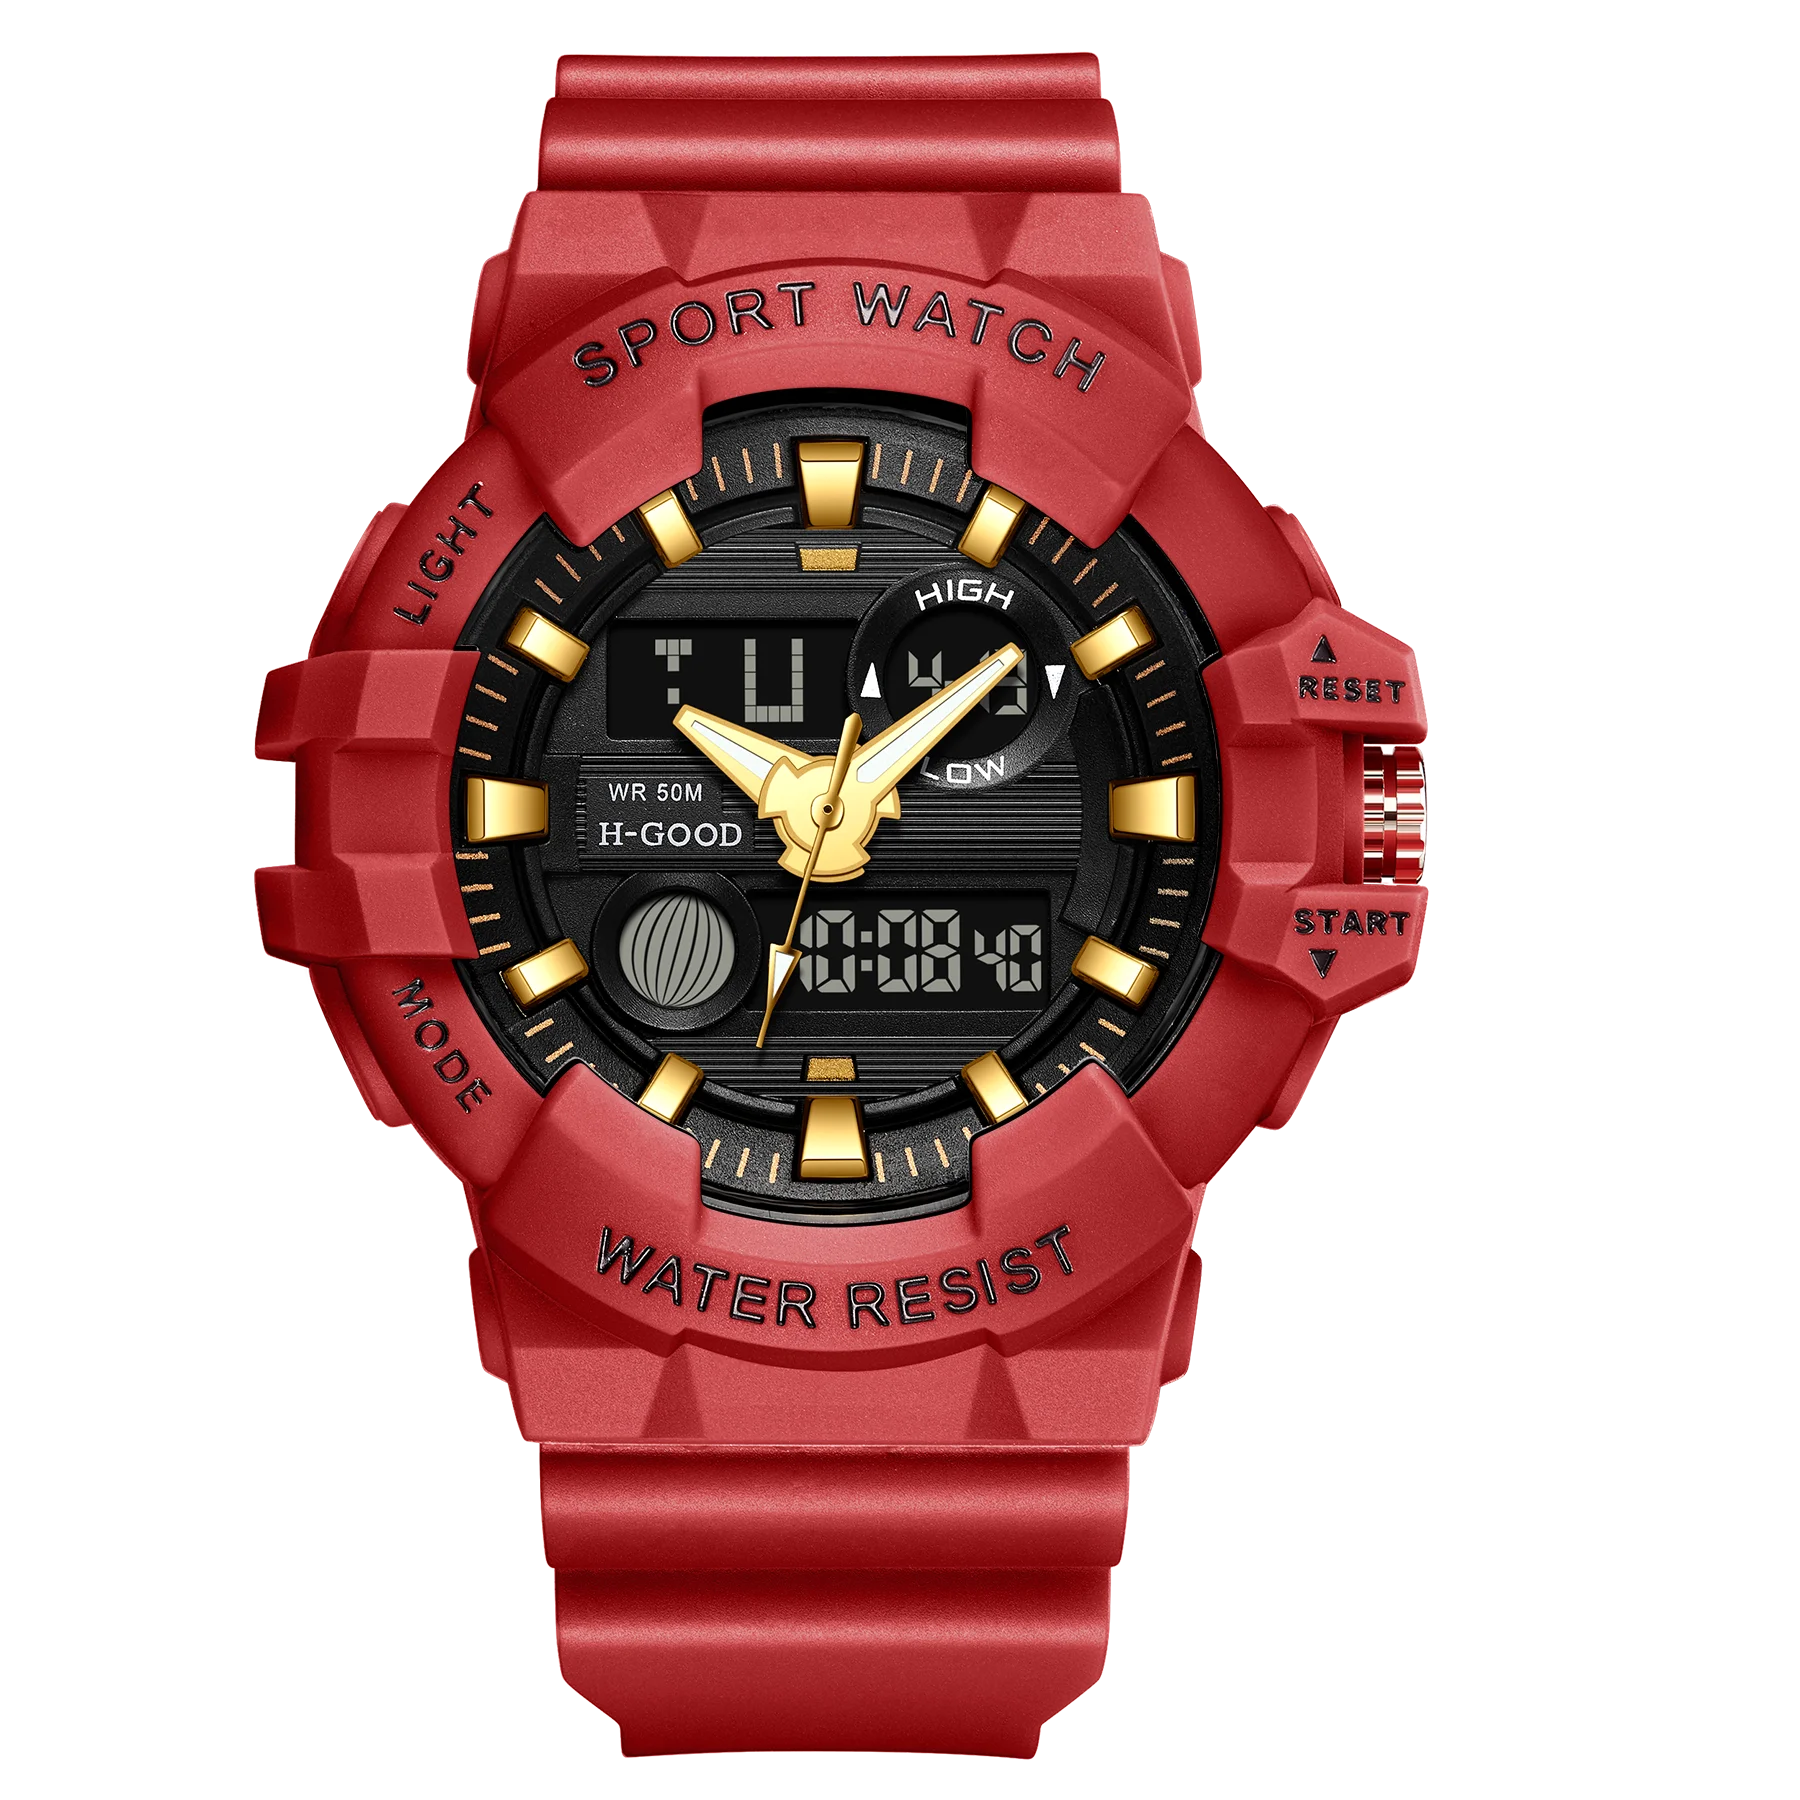 

H-GOOD TK-0015 Wholesale Gshock Fashion Digital Watch Suppliers Watches, 8 colors